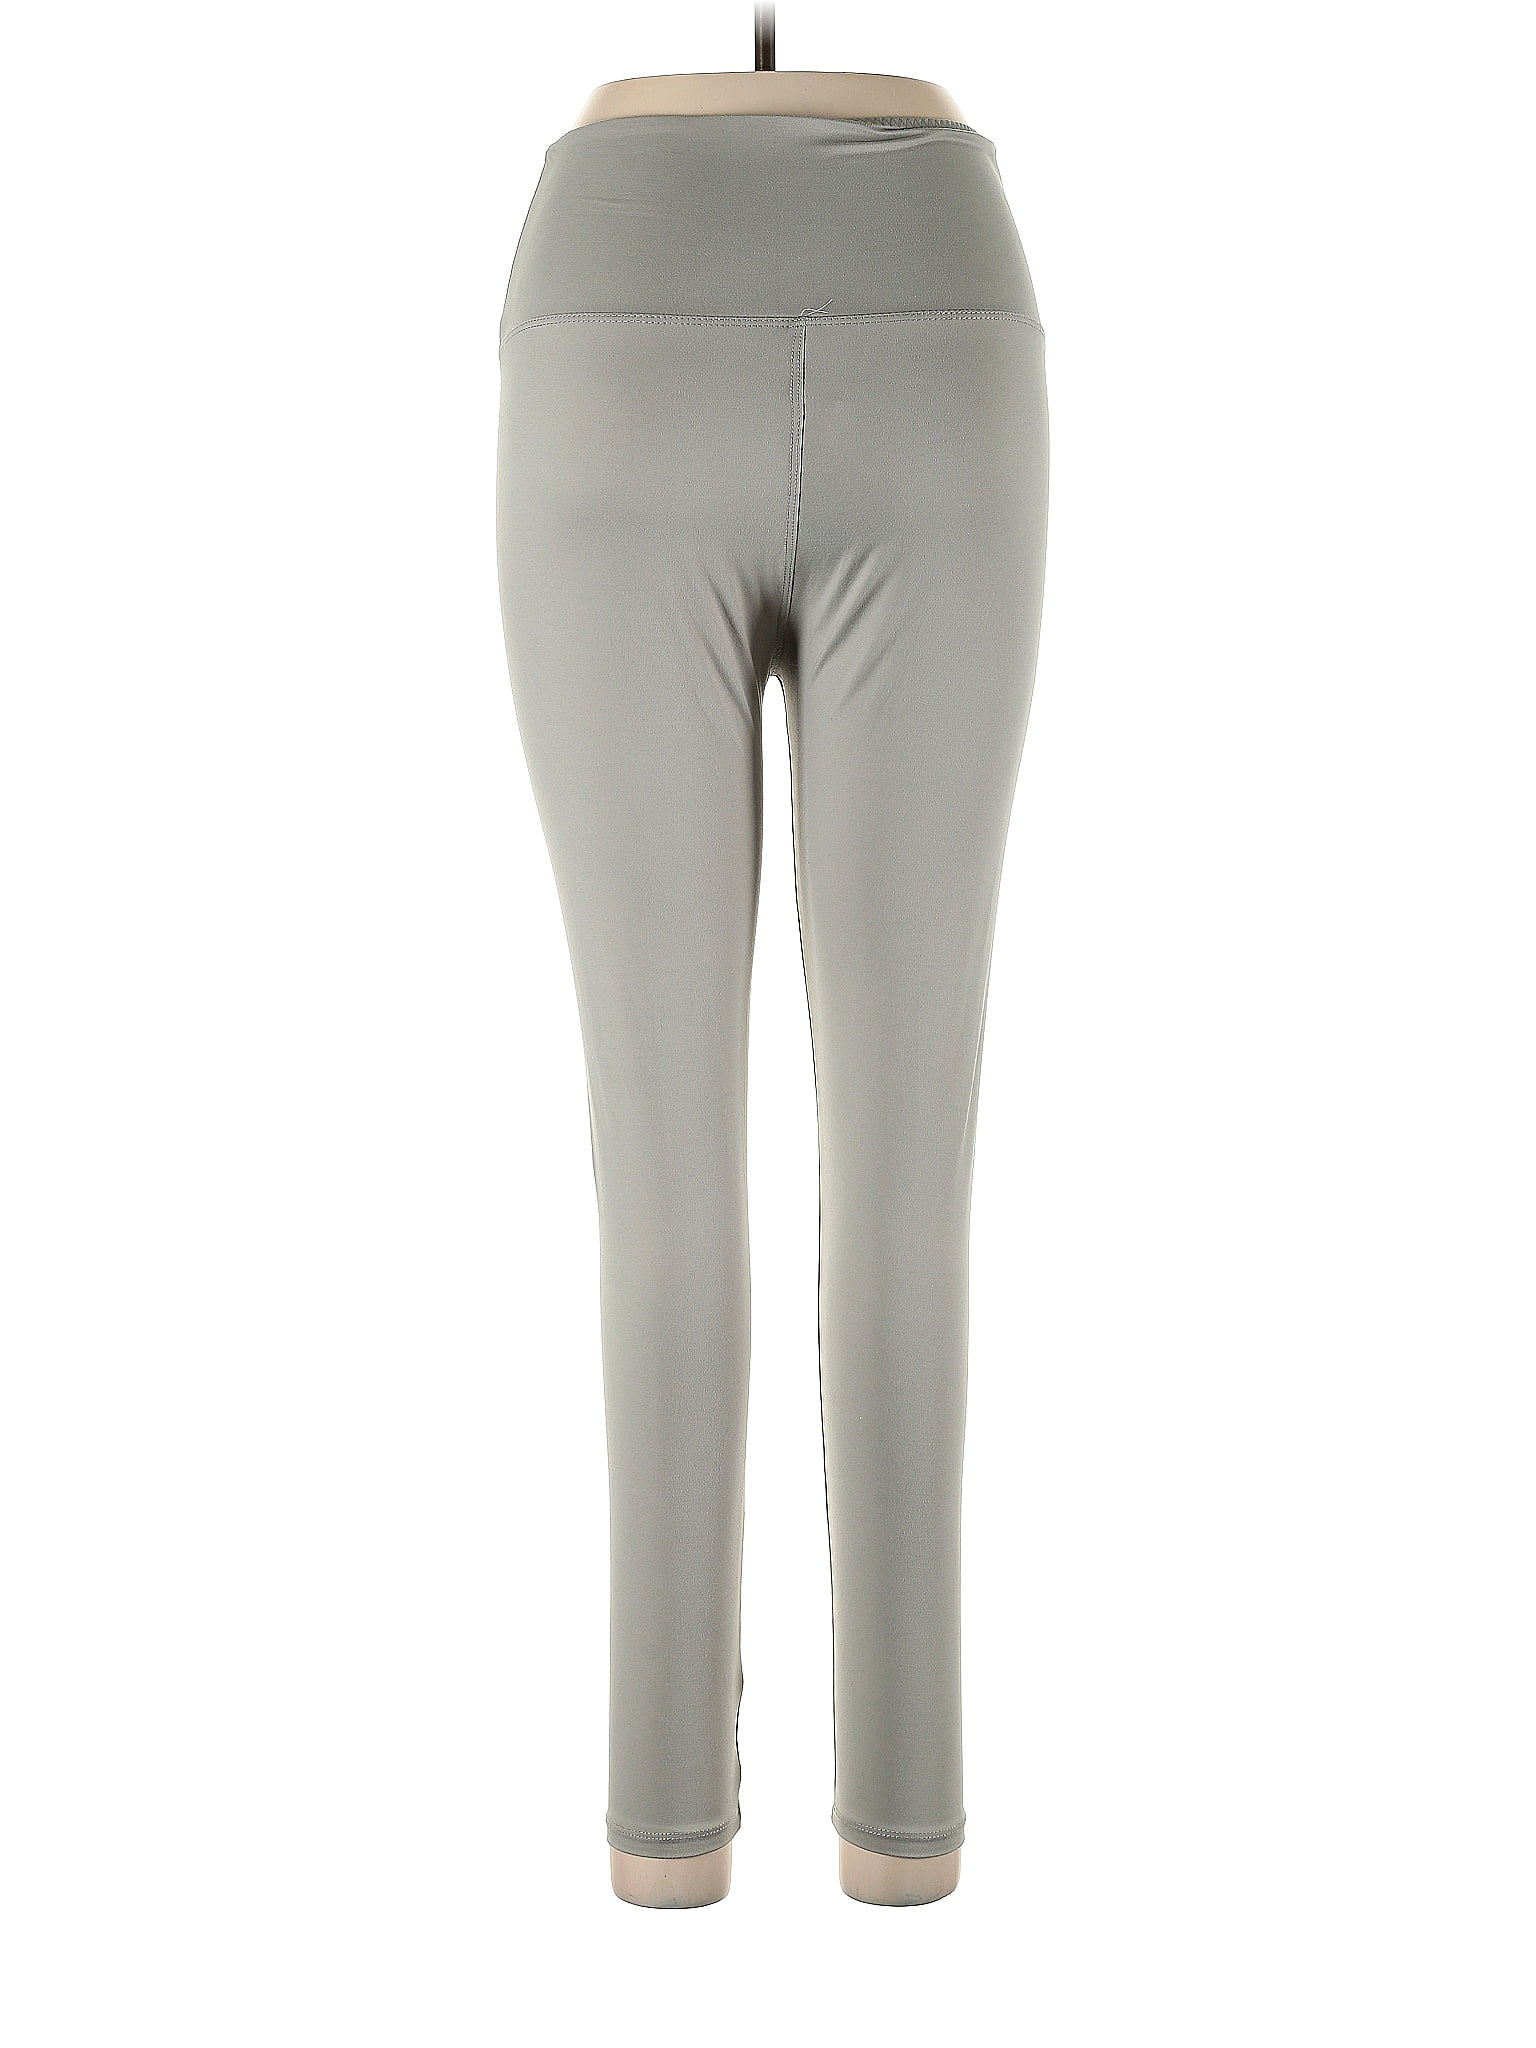 Unbranded Solid Gray Leggings Size Lg - XL - 72% off